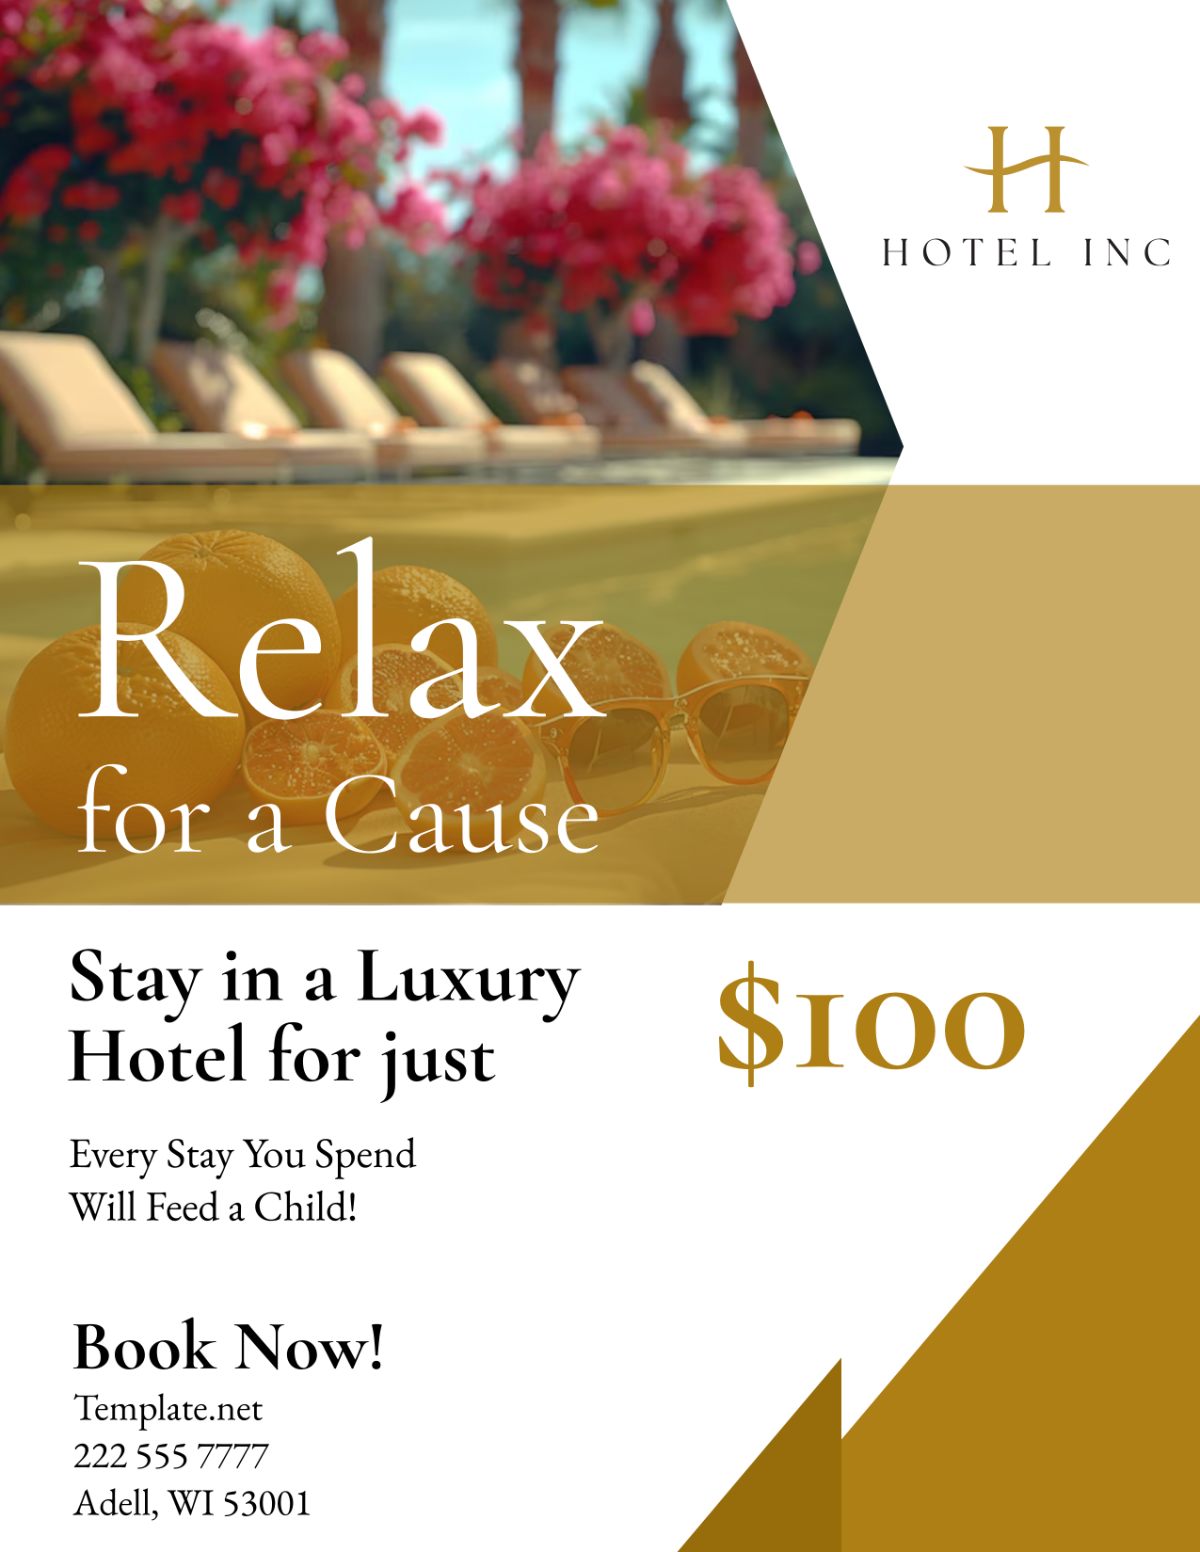 Hotel Campaign Flyer